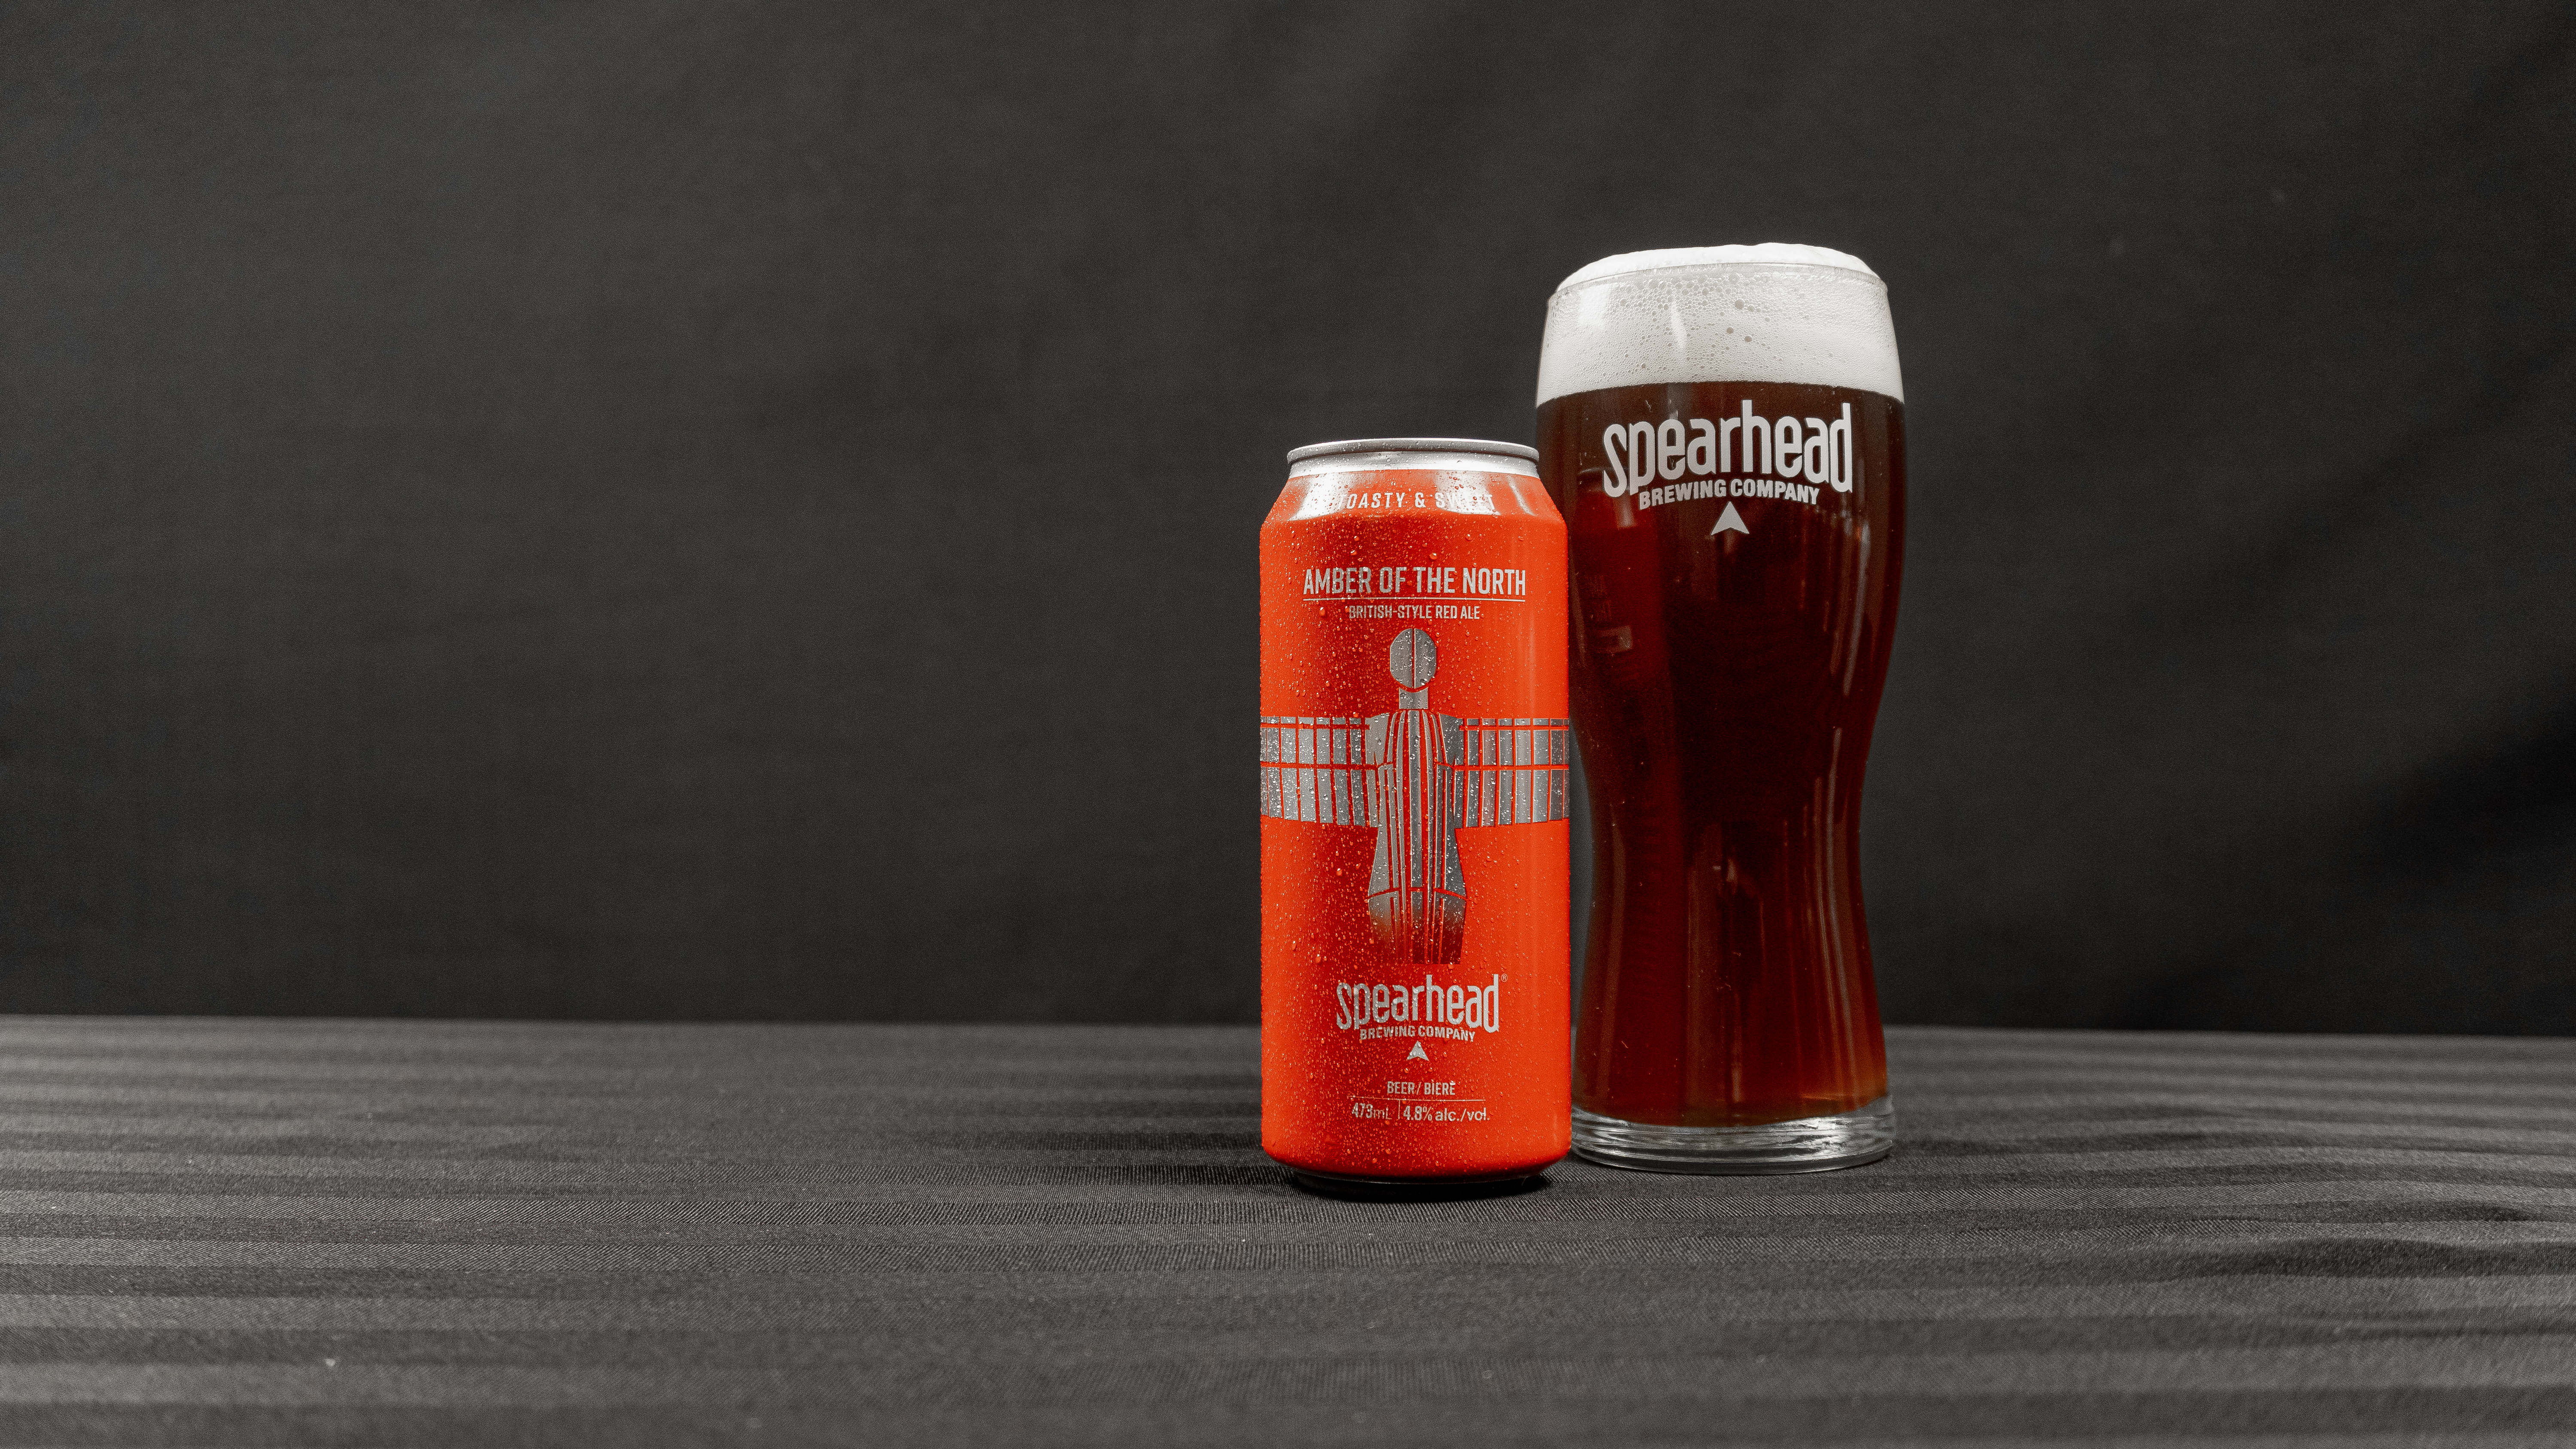 Amber of the North red ale